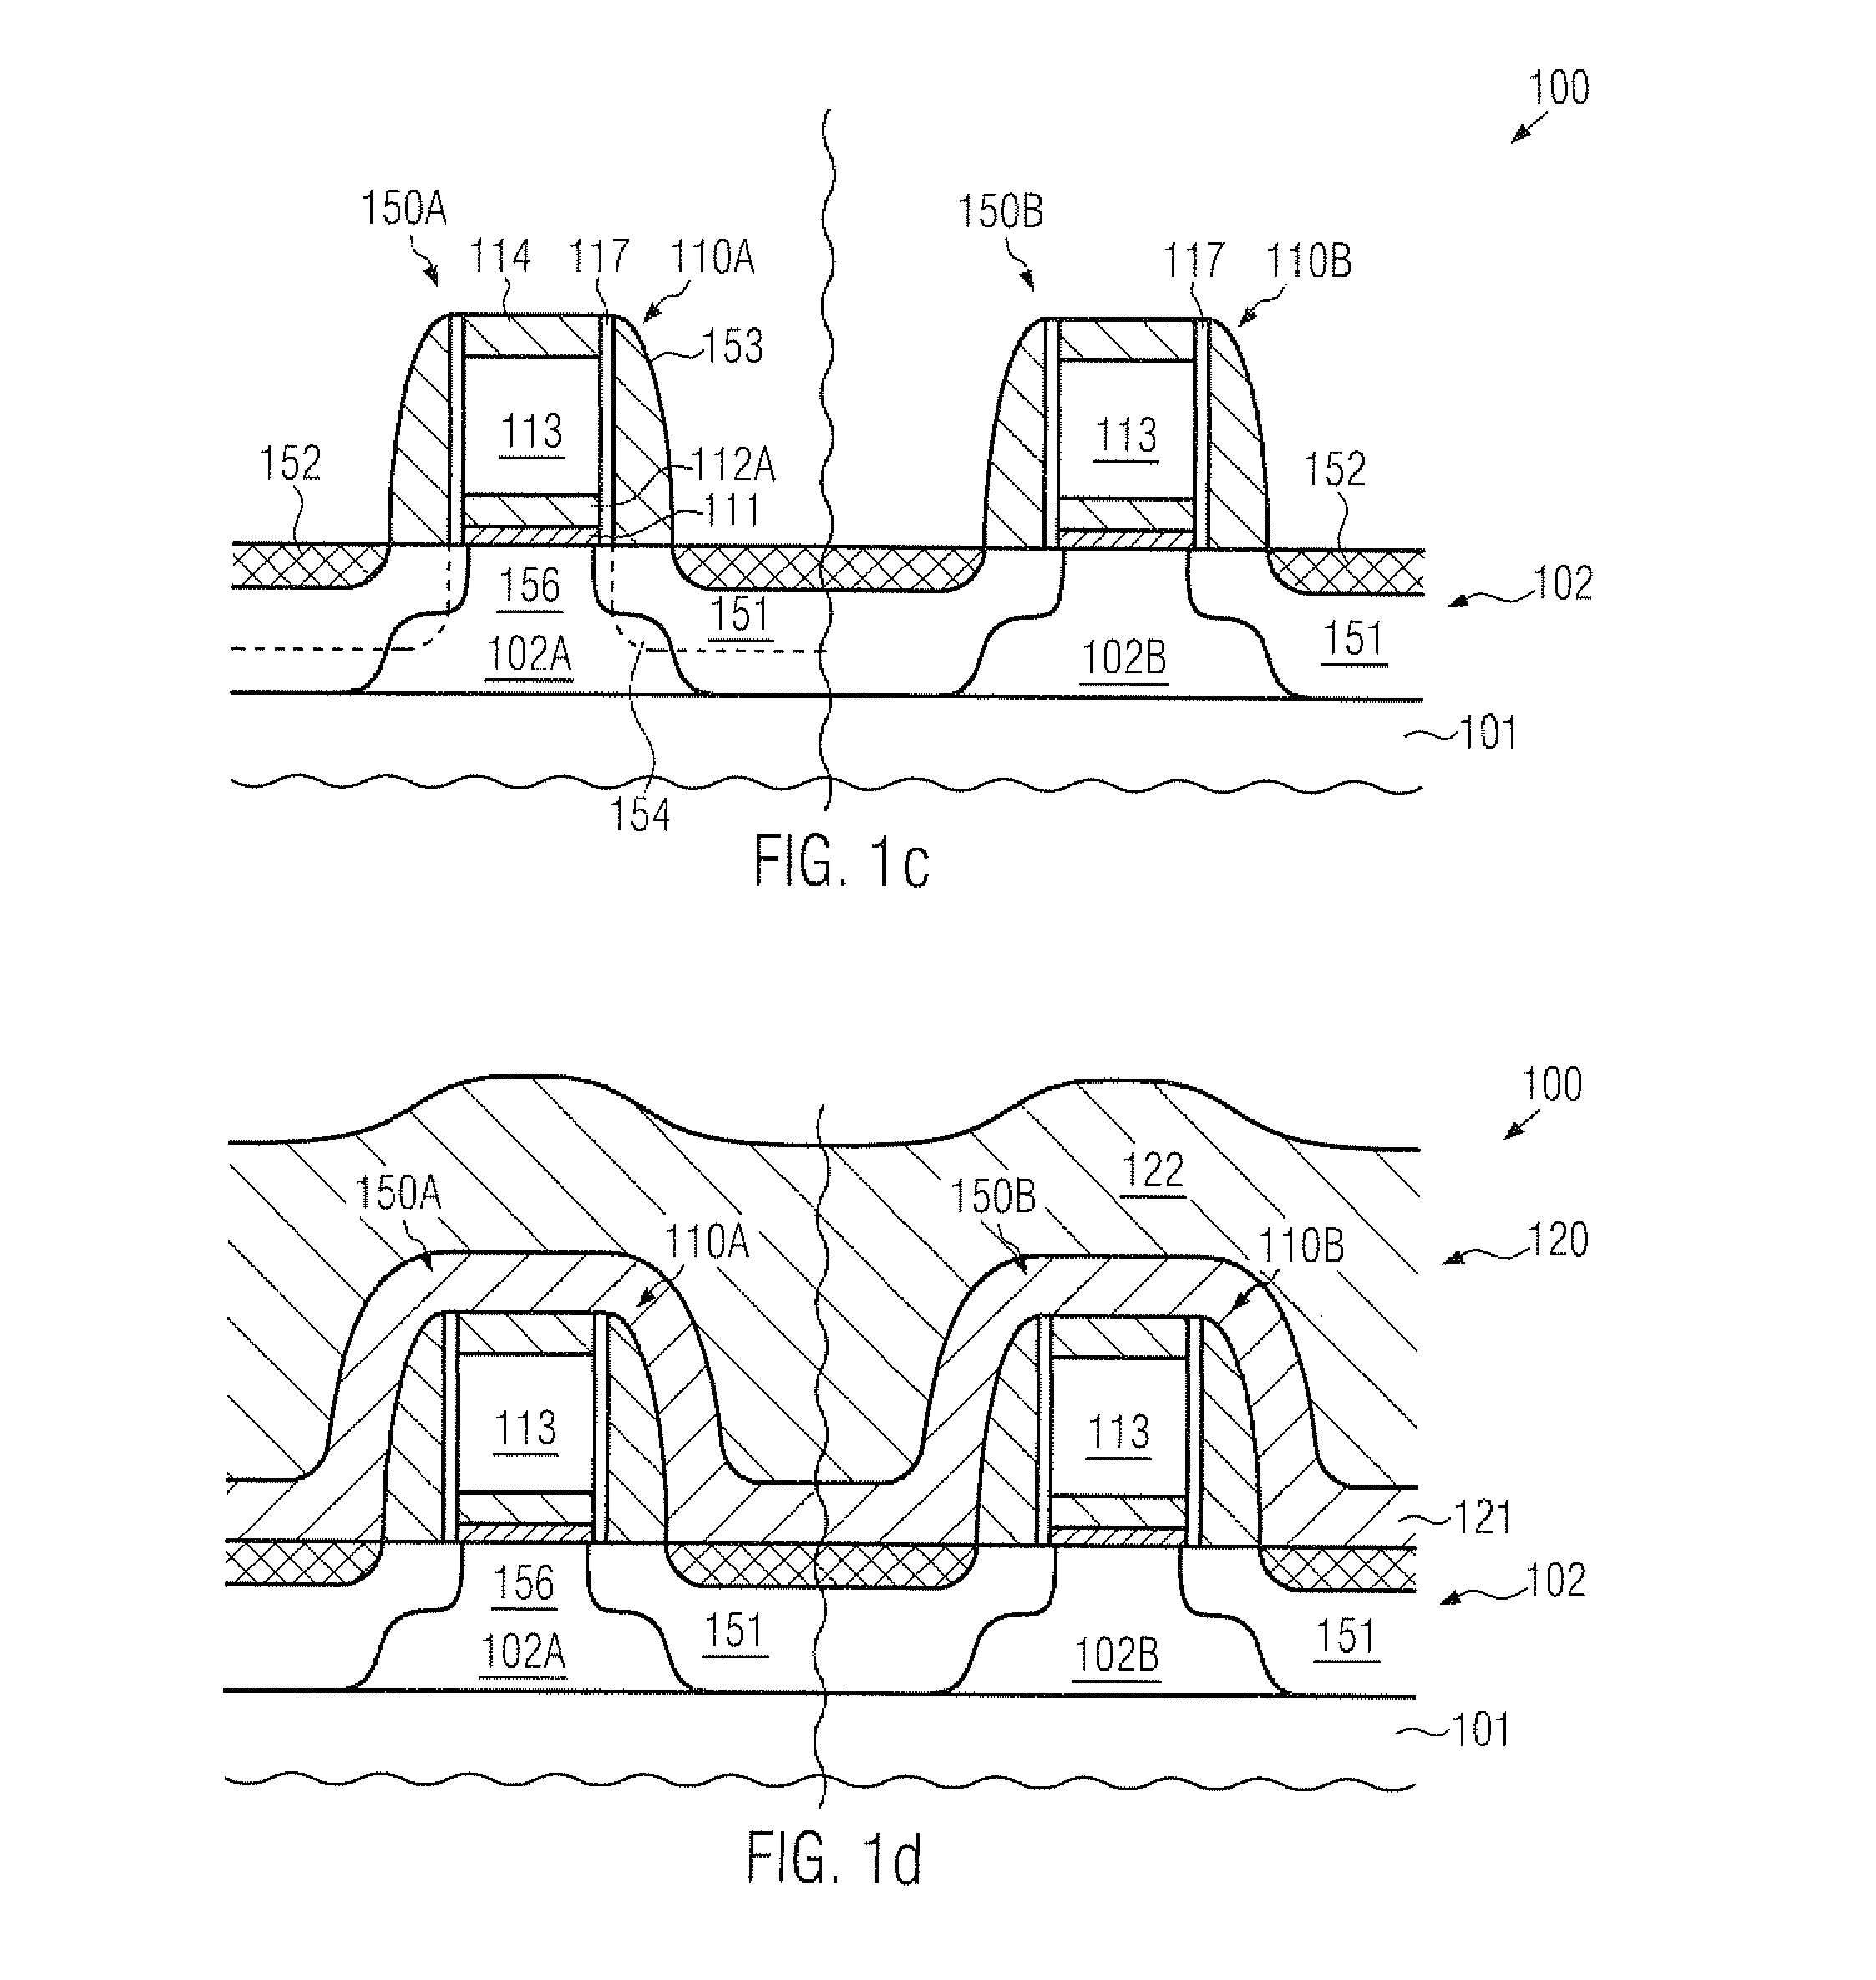 Semiconductor device formed by a replacement gate approach based on an early work function metal